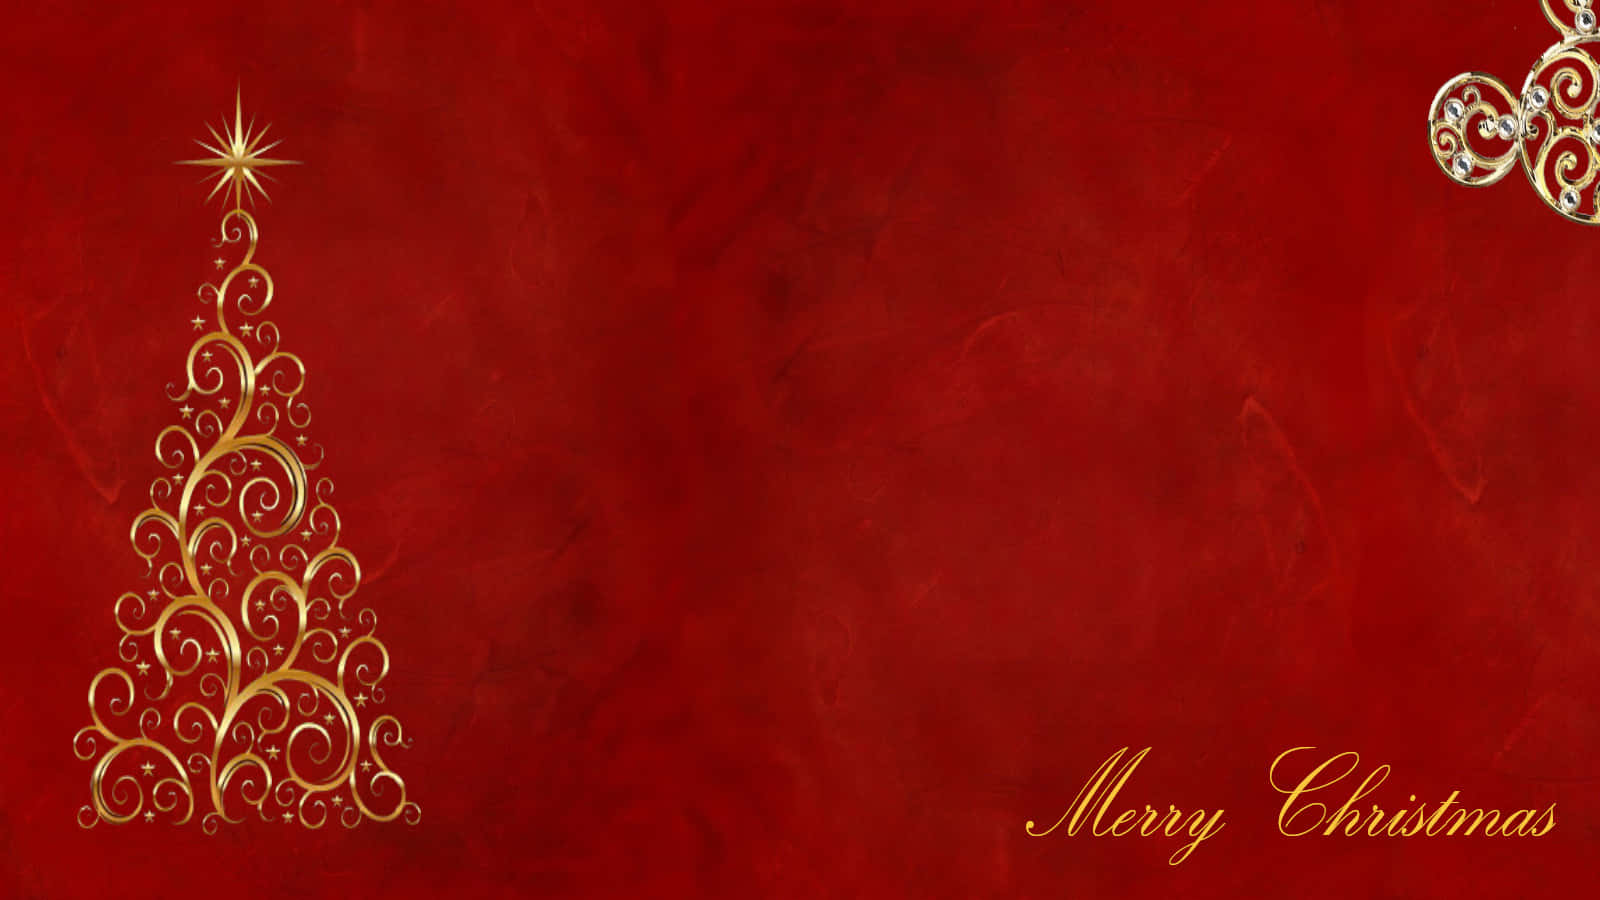 Light up your holidays with Red Aesthetic Christmas. Wallpaper